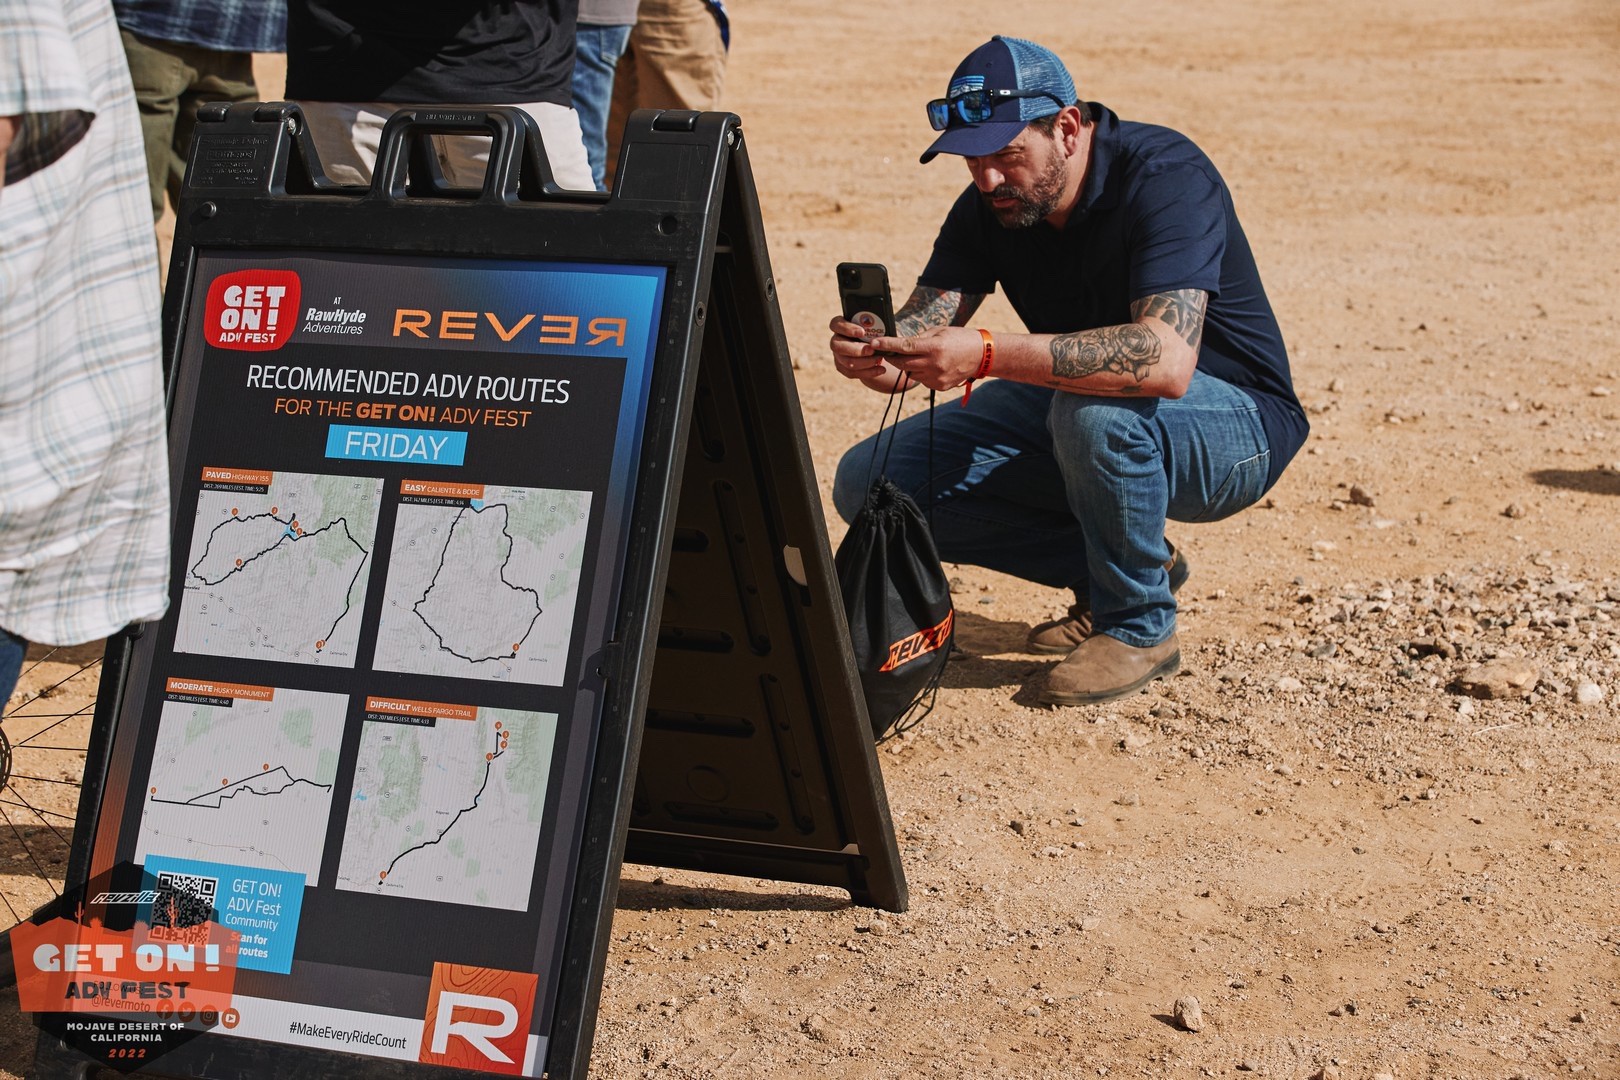 A rider downloads a route from the Rever board at the GET ON! Adv Fest rally in Mojave.